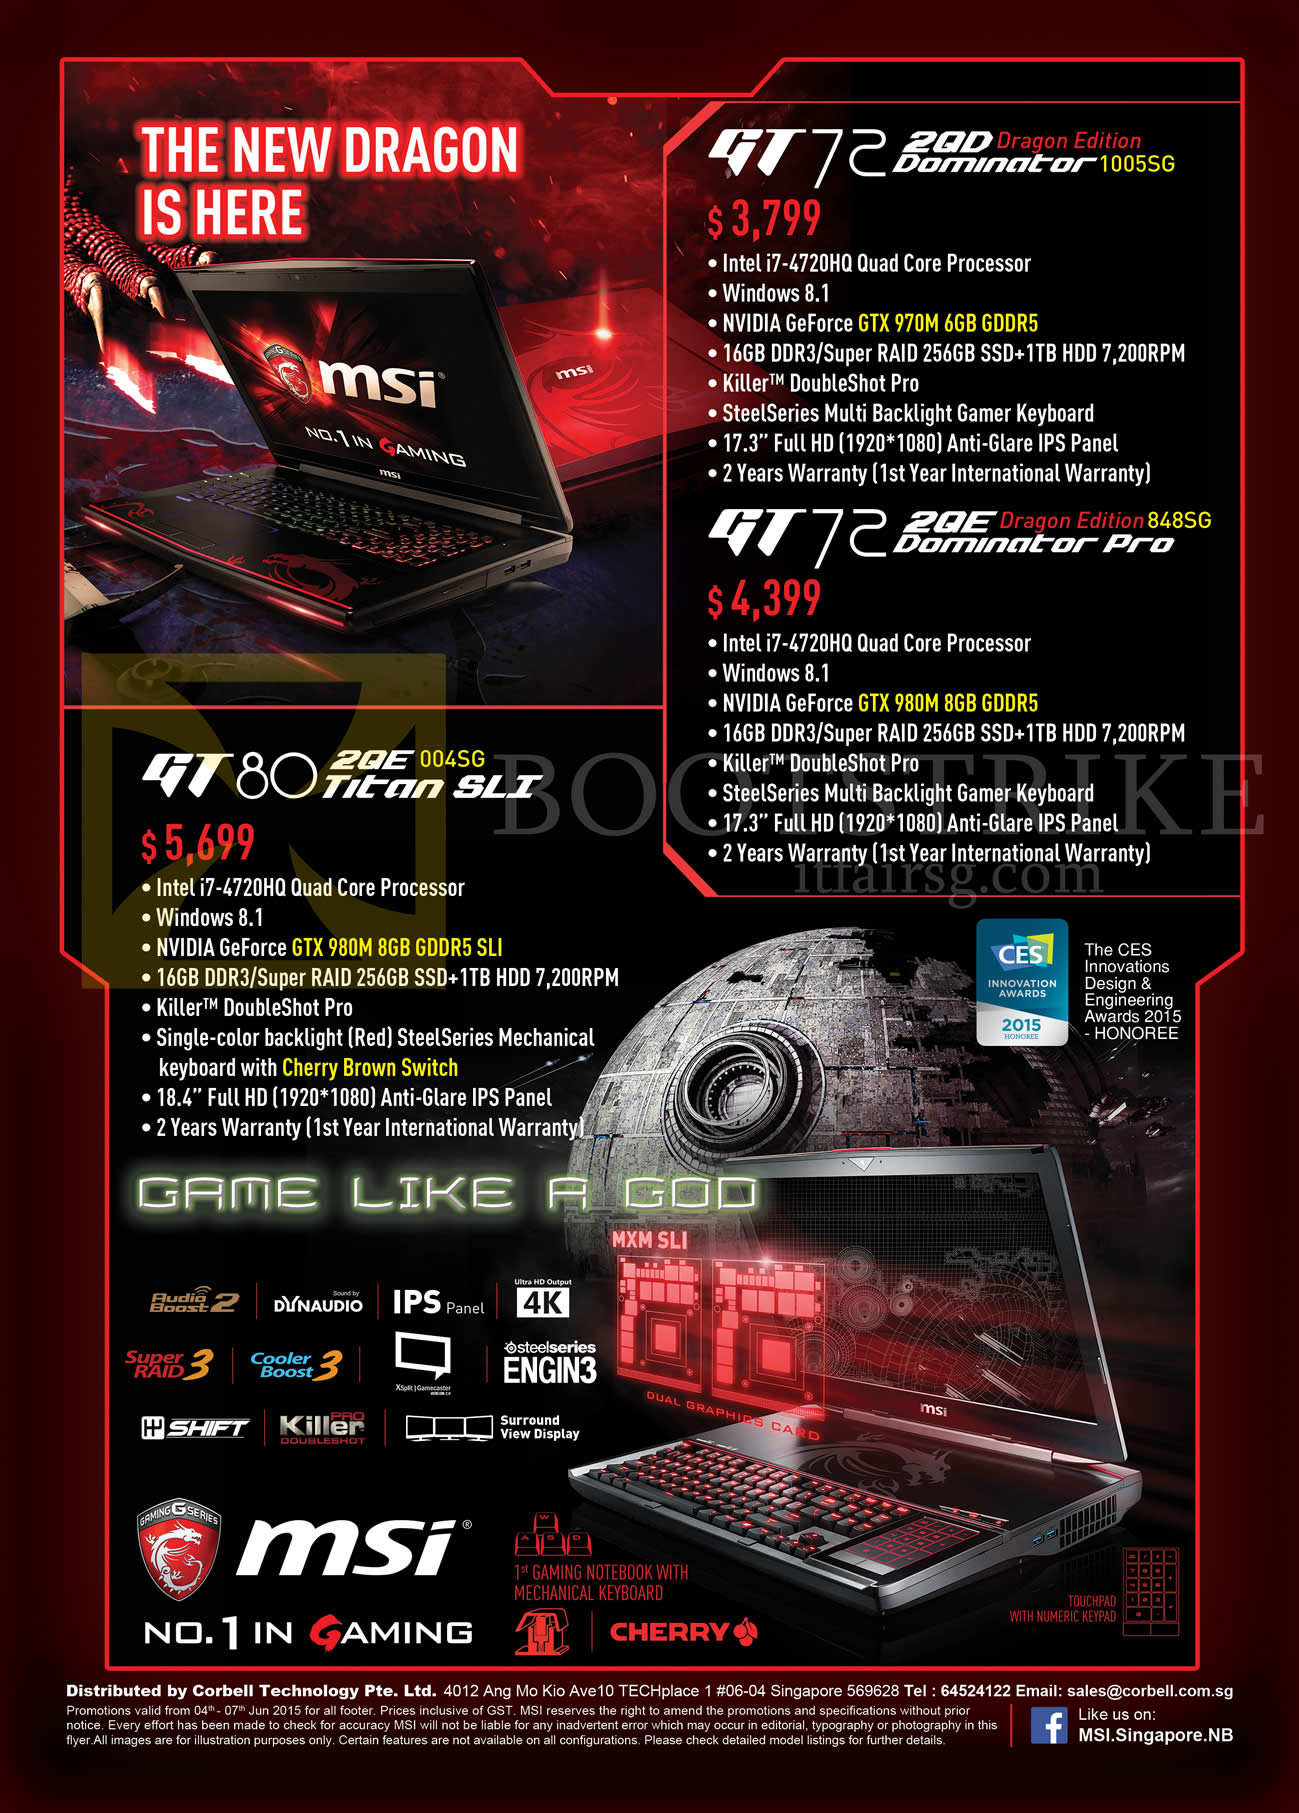 PC SHOW 2015 price list image brochure of MSI Notebooks Gamepro Shop GT72 2QD 1005SG 848SG Dragon Edition, GT80 004SG